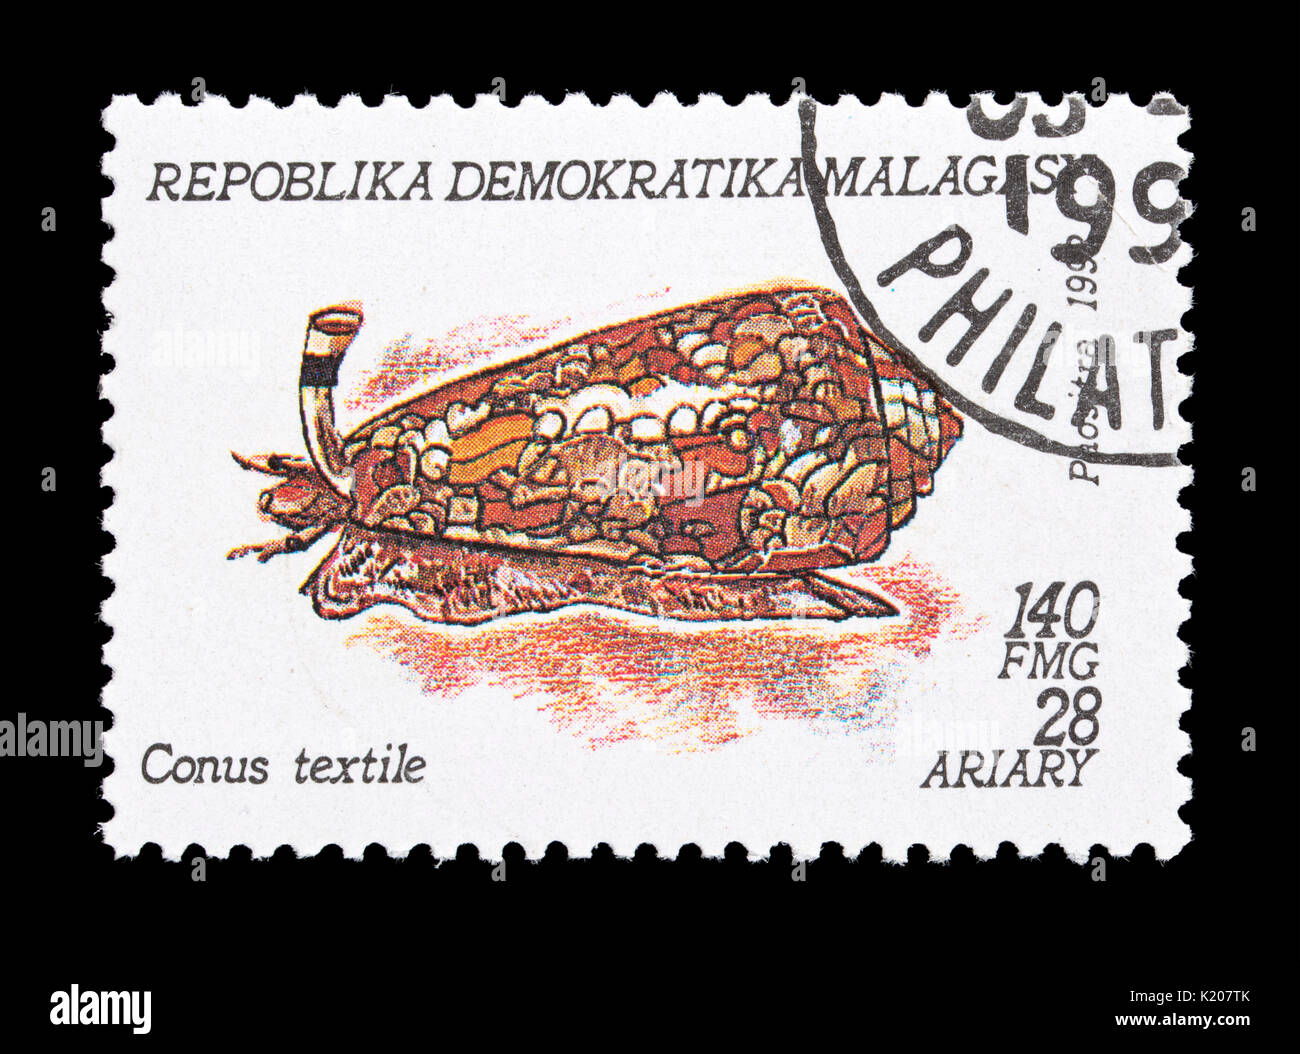 Postage stamp from Madagascar depicting a cone snail (Conus textile) Stock Photo